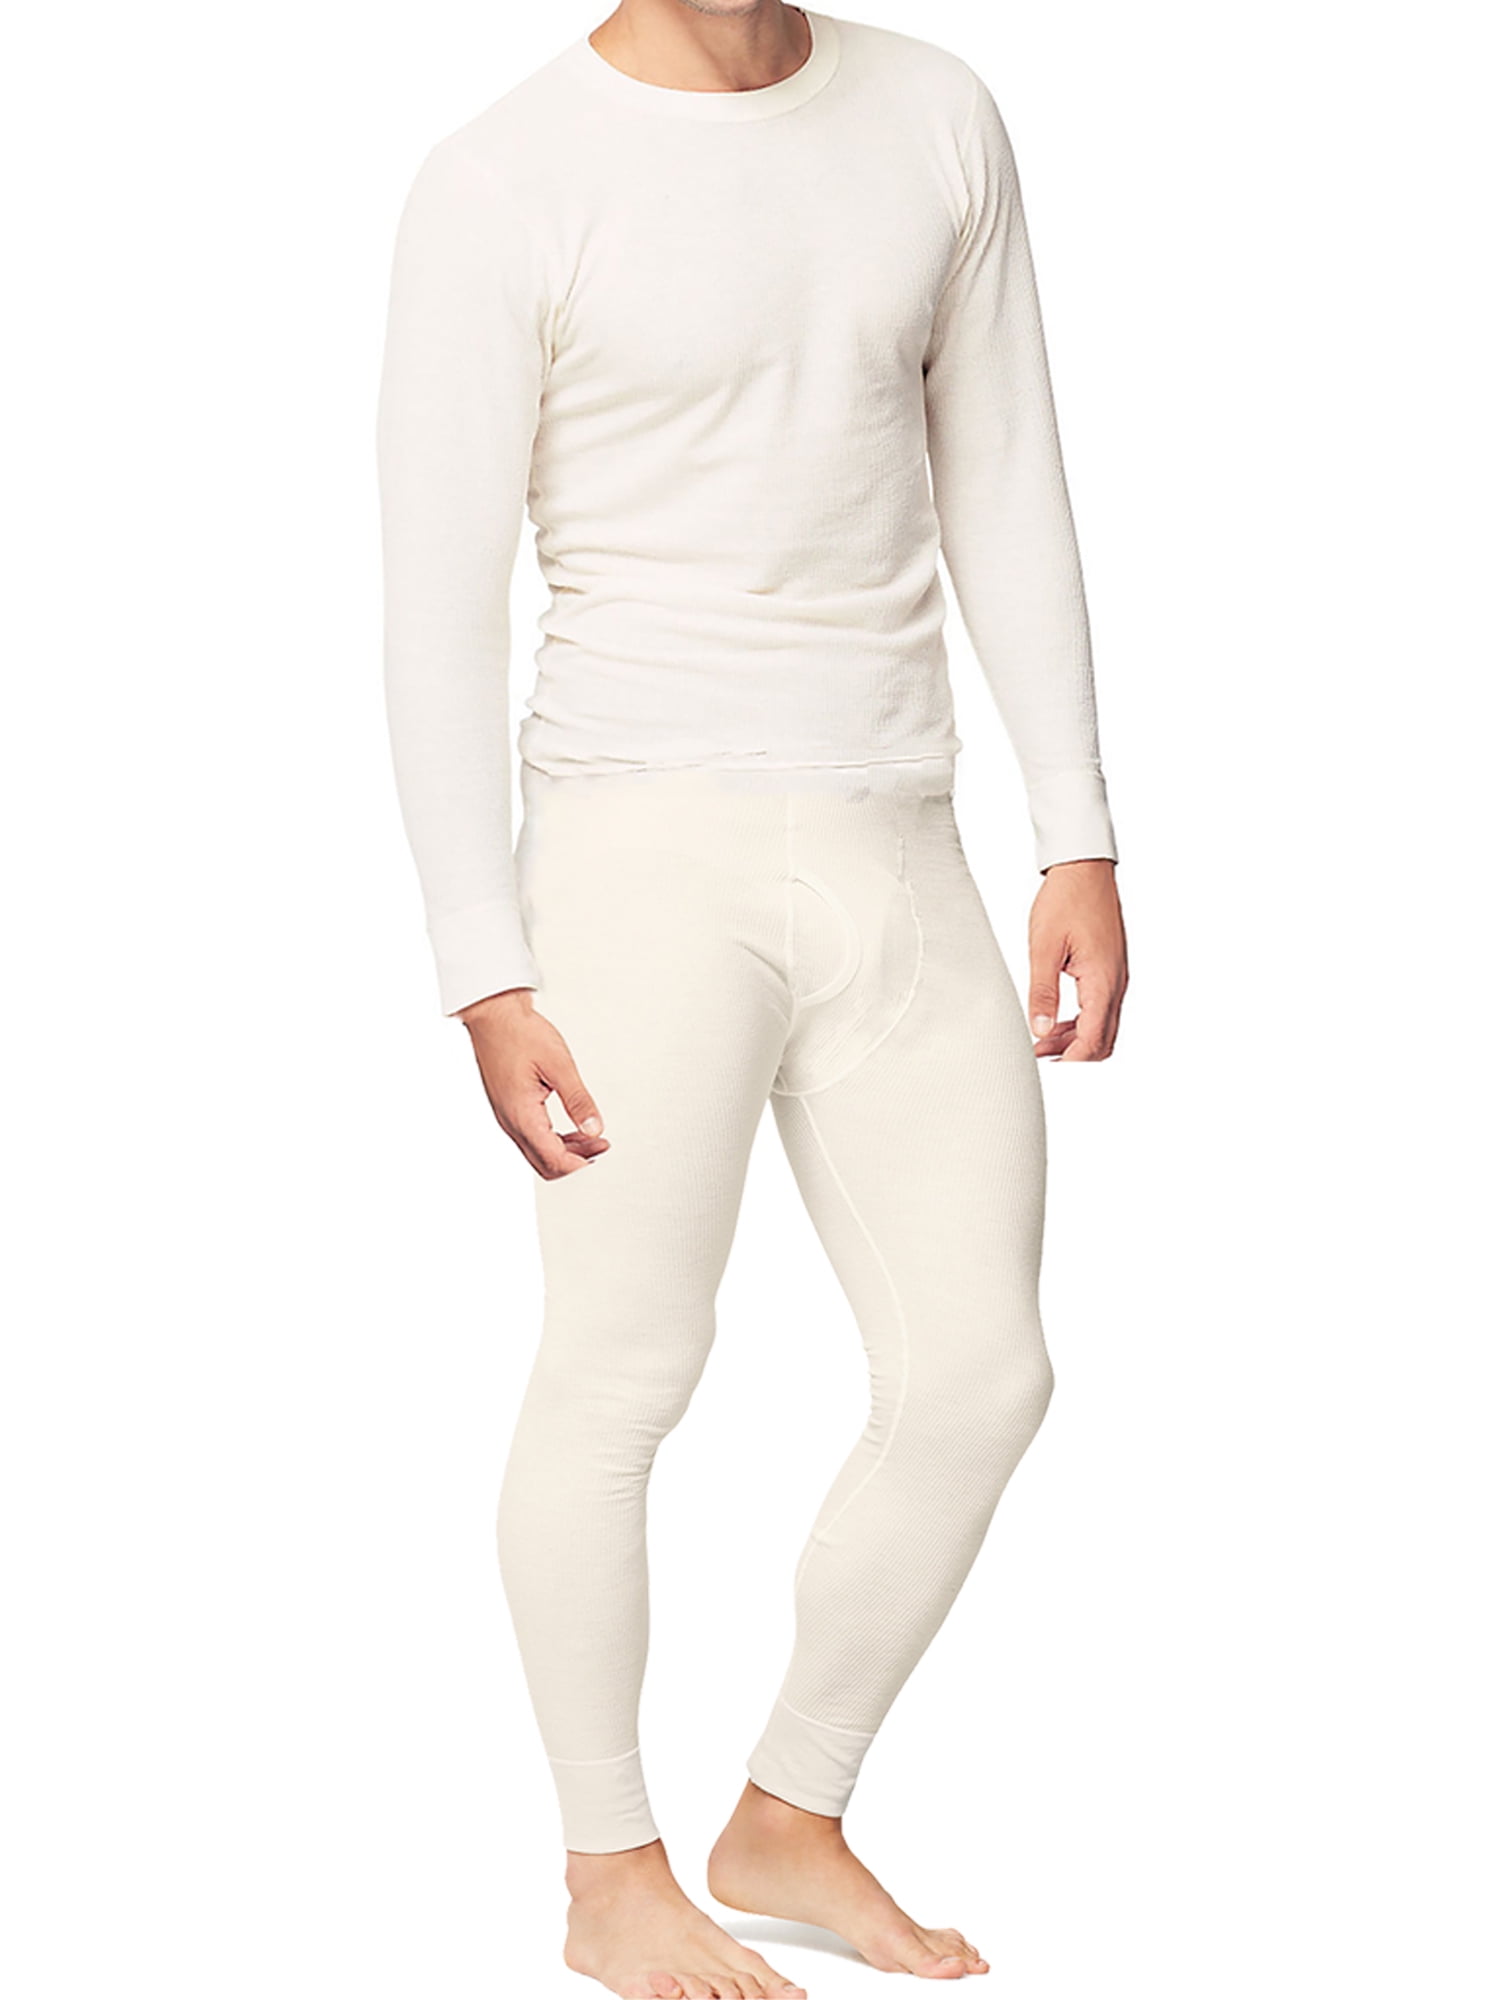 Place and Street Mens 2pc Thermal Underwear Set Cotton Long Johns 